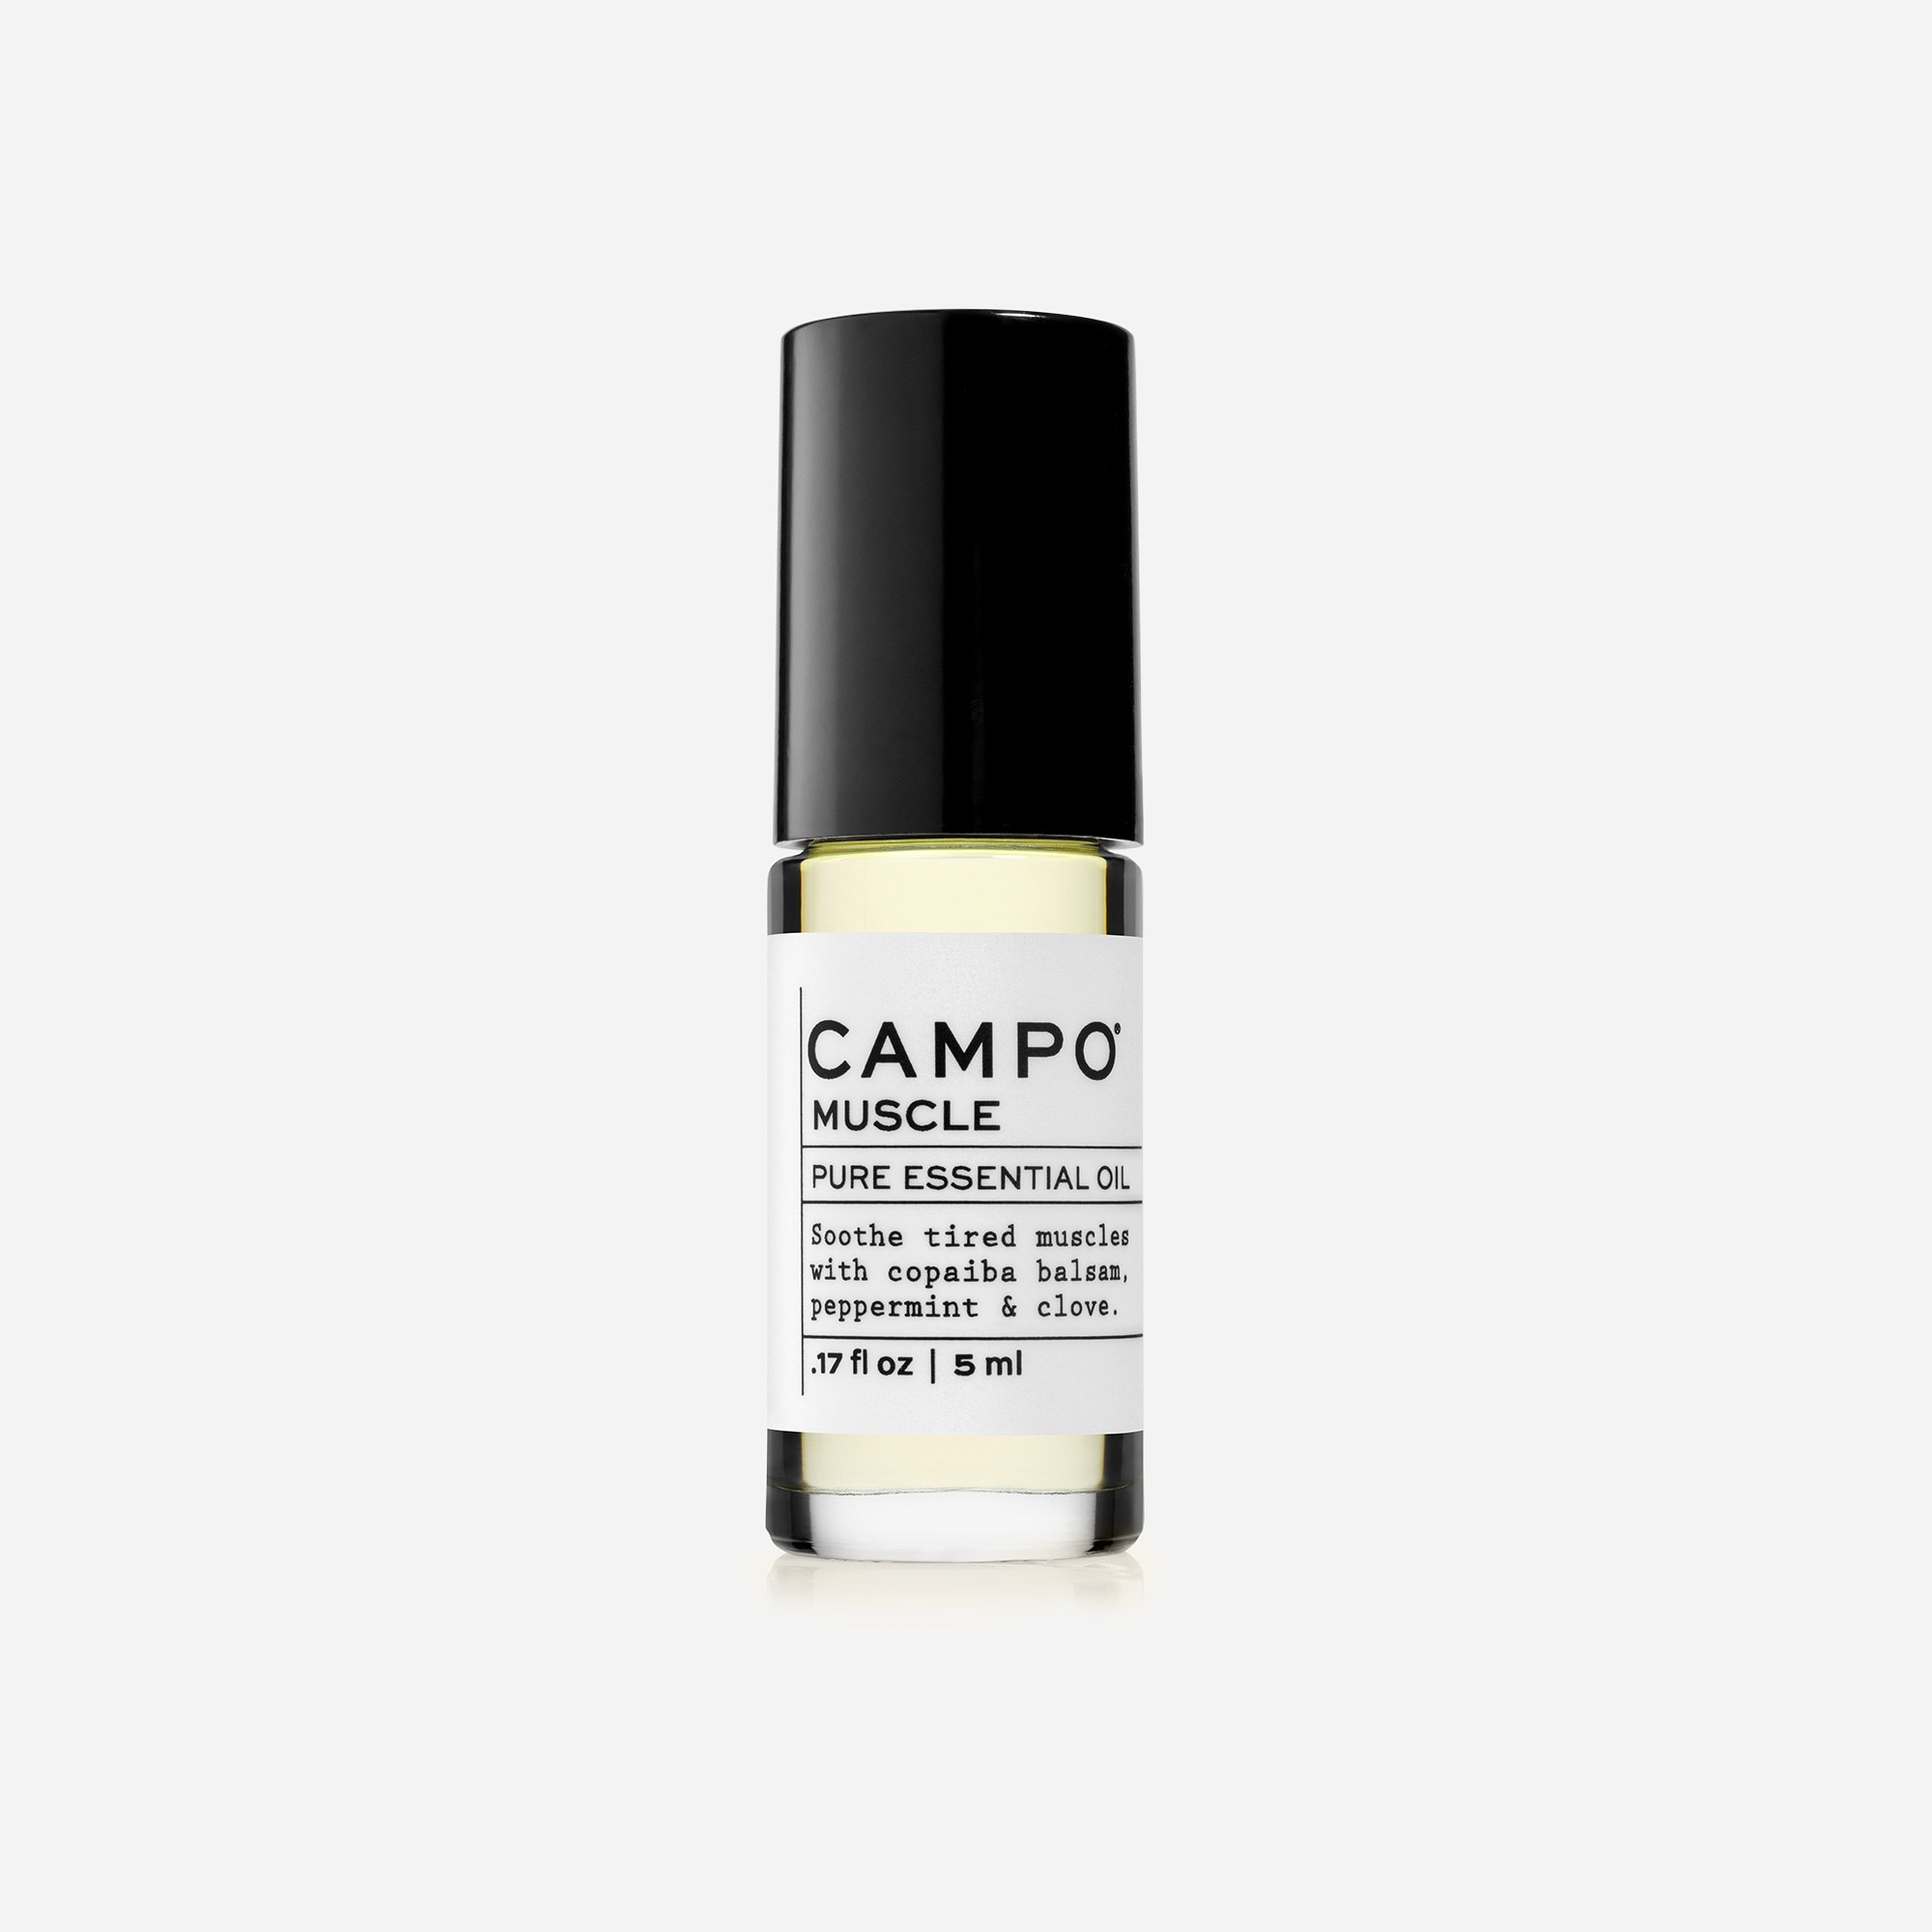  CAMPO® MUSCLE roll-on oil